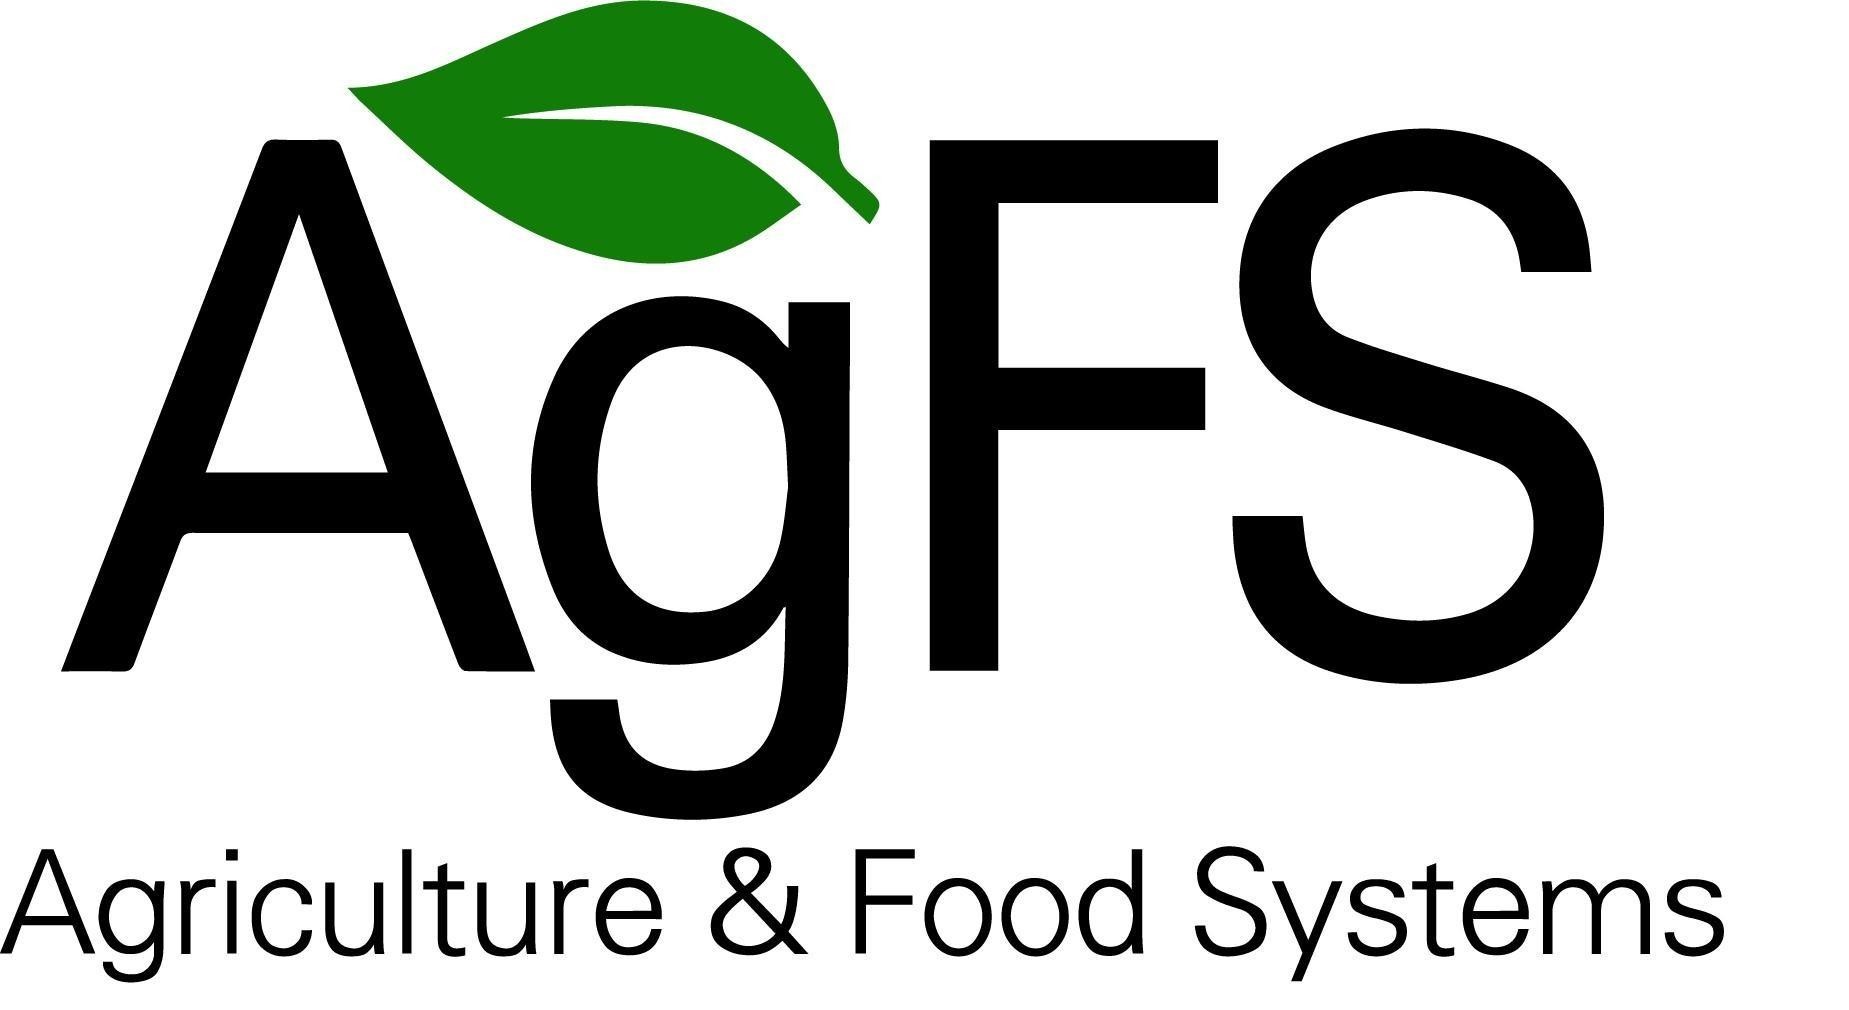 Agriculture & Food Sciences logo with leaf